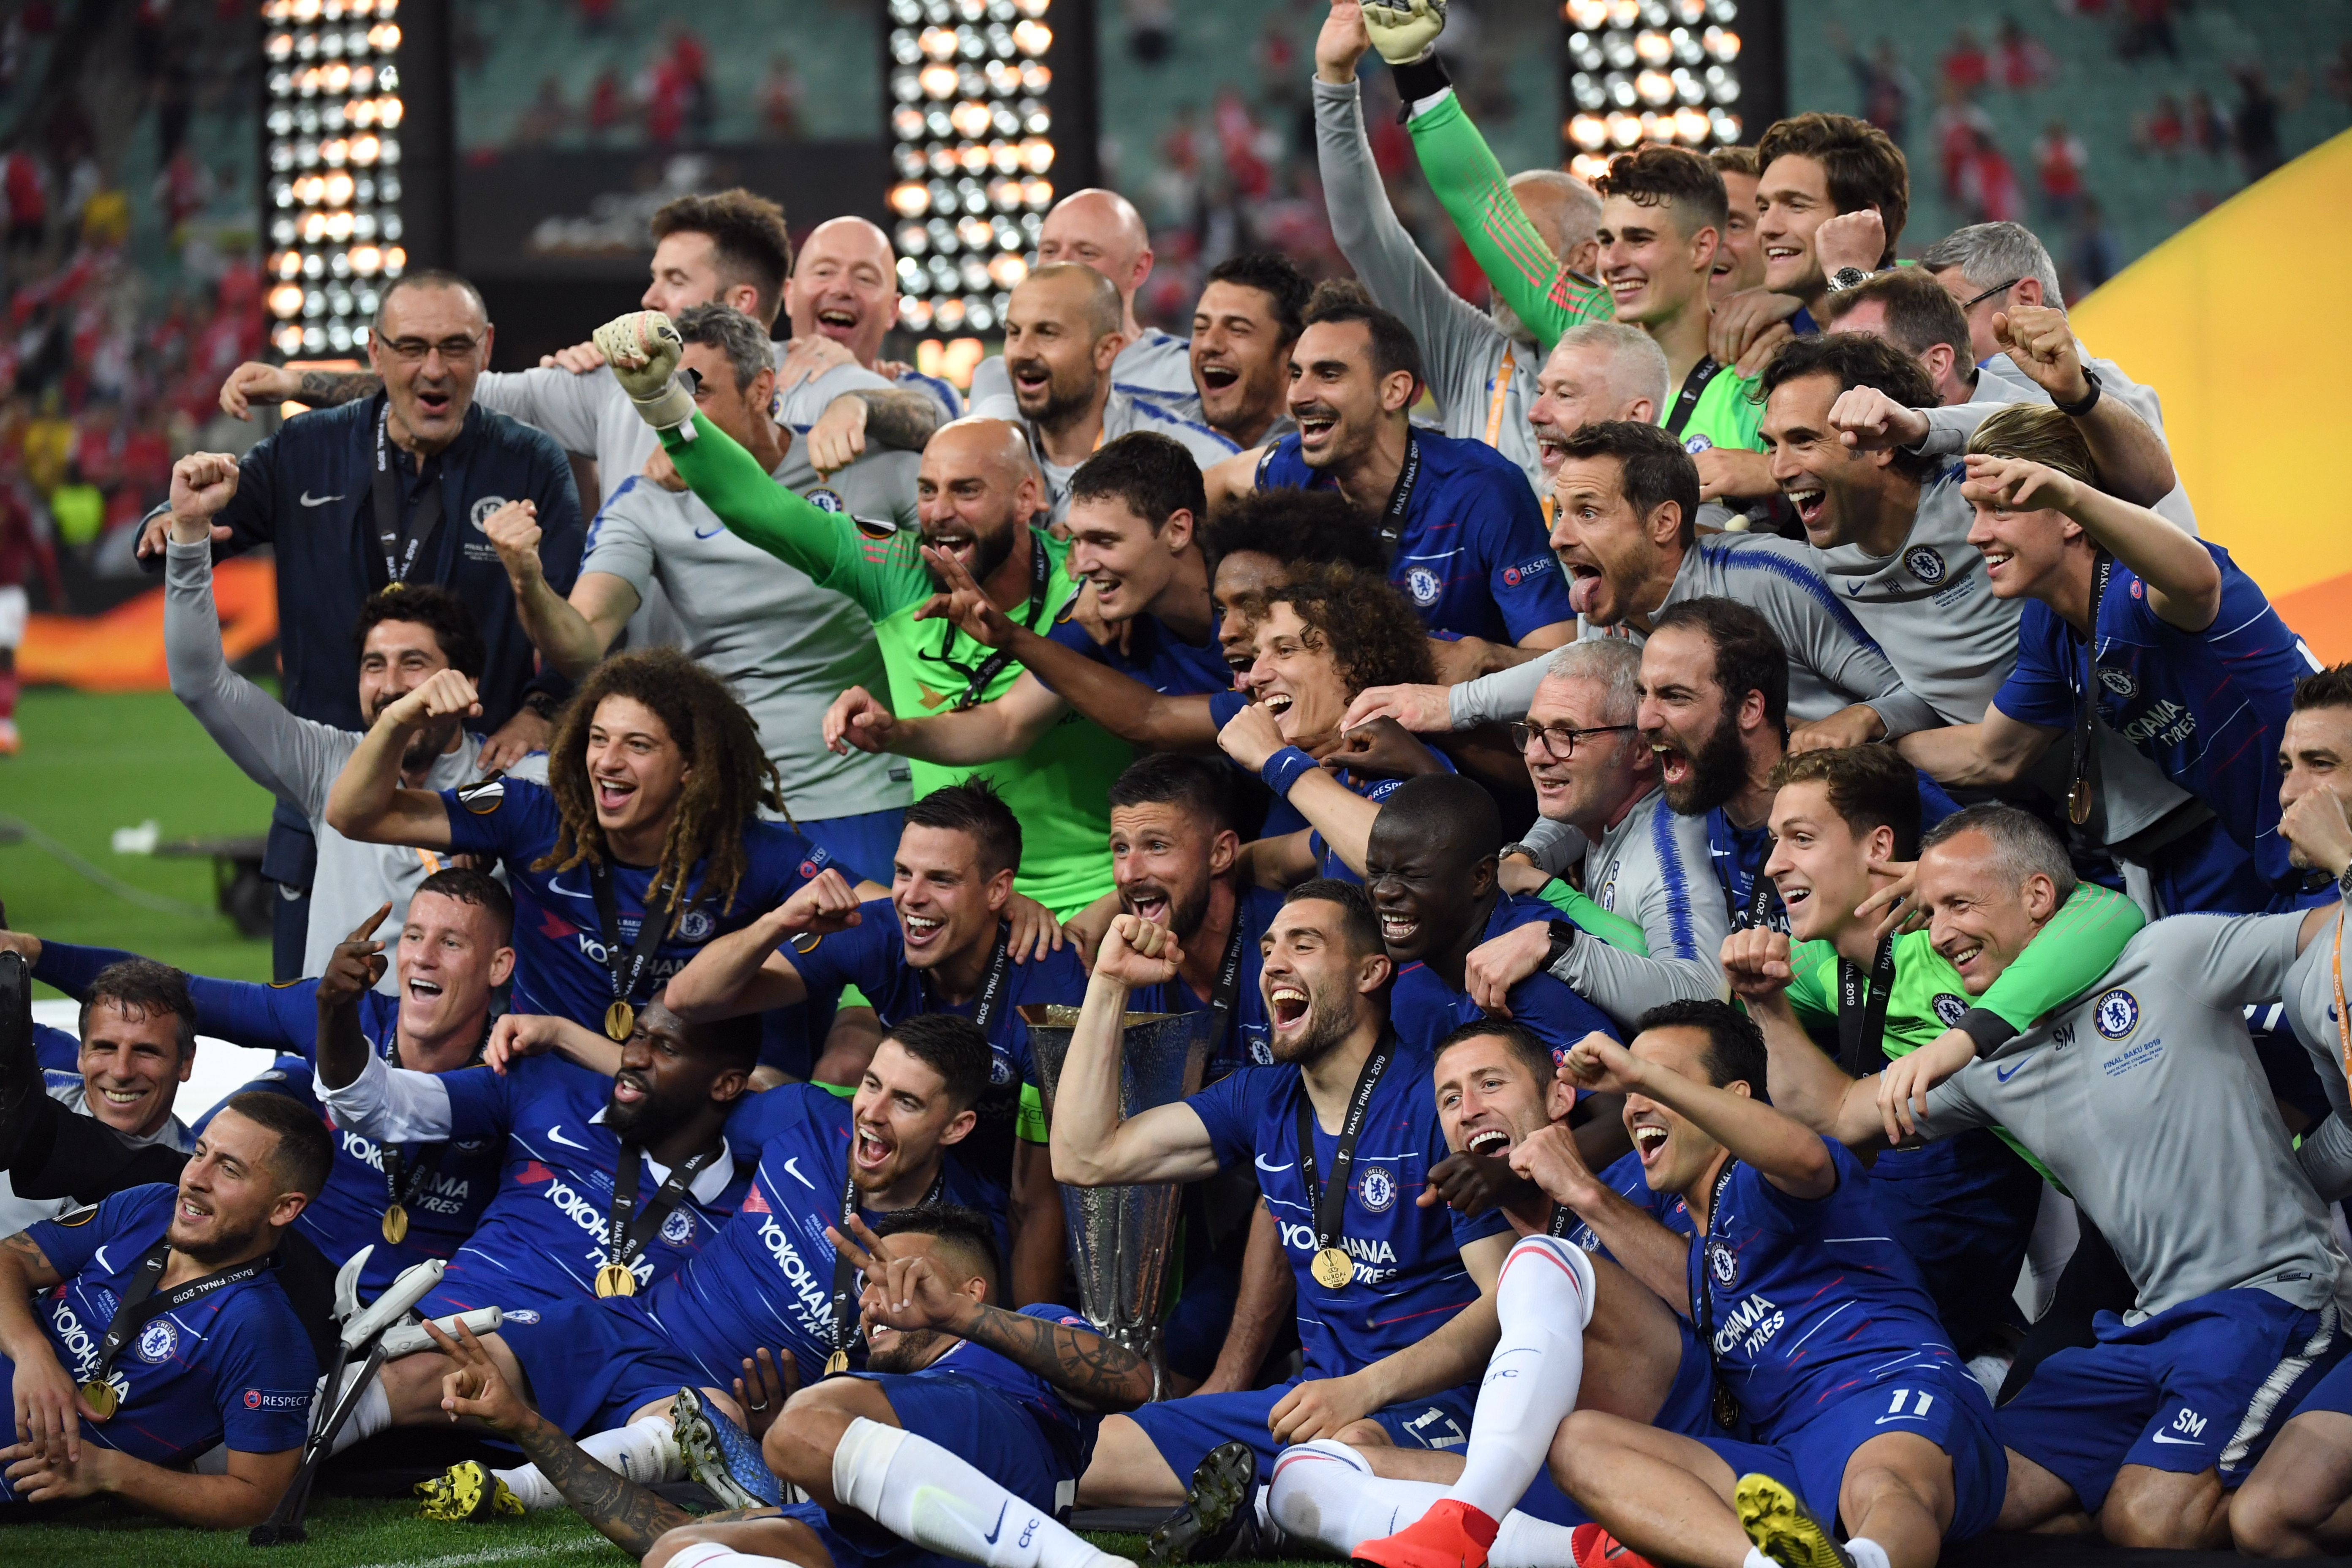 Chelsea's players celebrate with the trophy after winning the UEFA Europa League final football match between Chelsea FC and Arsenal FC at the Baku Olympic Stadium in Baku, Azerbaijian, on May 29, 2019. (Photo by OZAN KOSE / AFP)        (Photo credit should read OZAN KOSE/AFP/Getty Images)